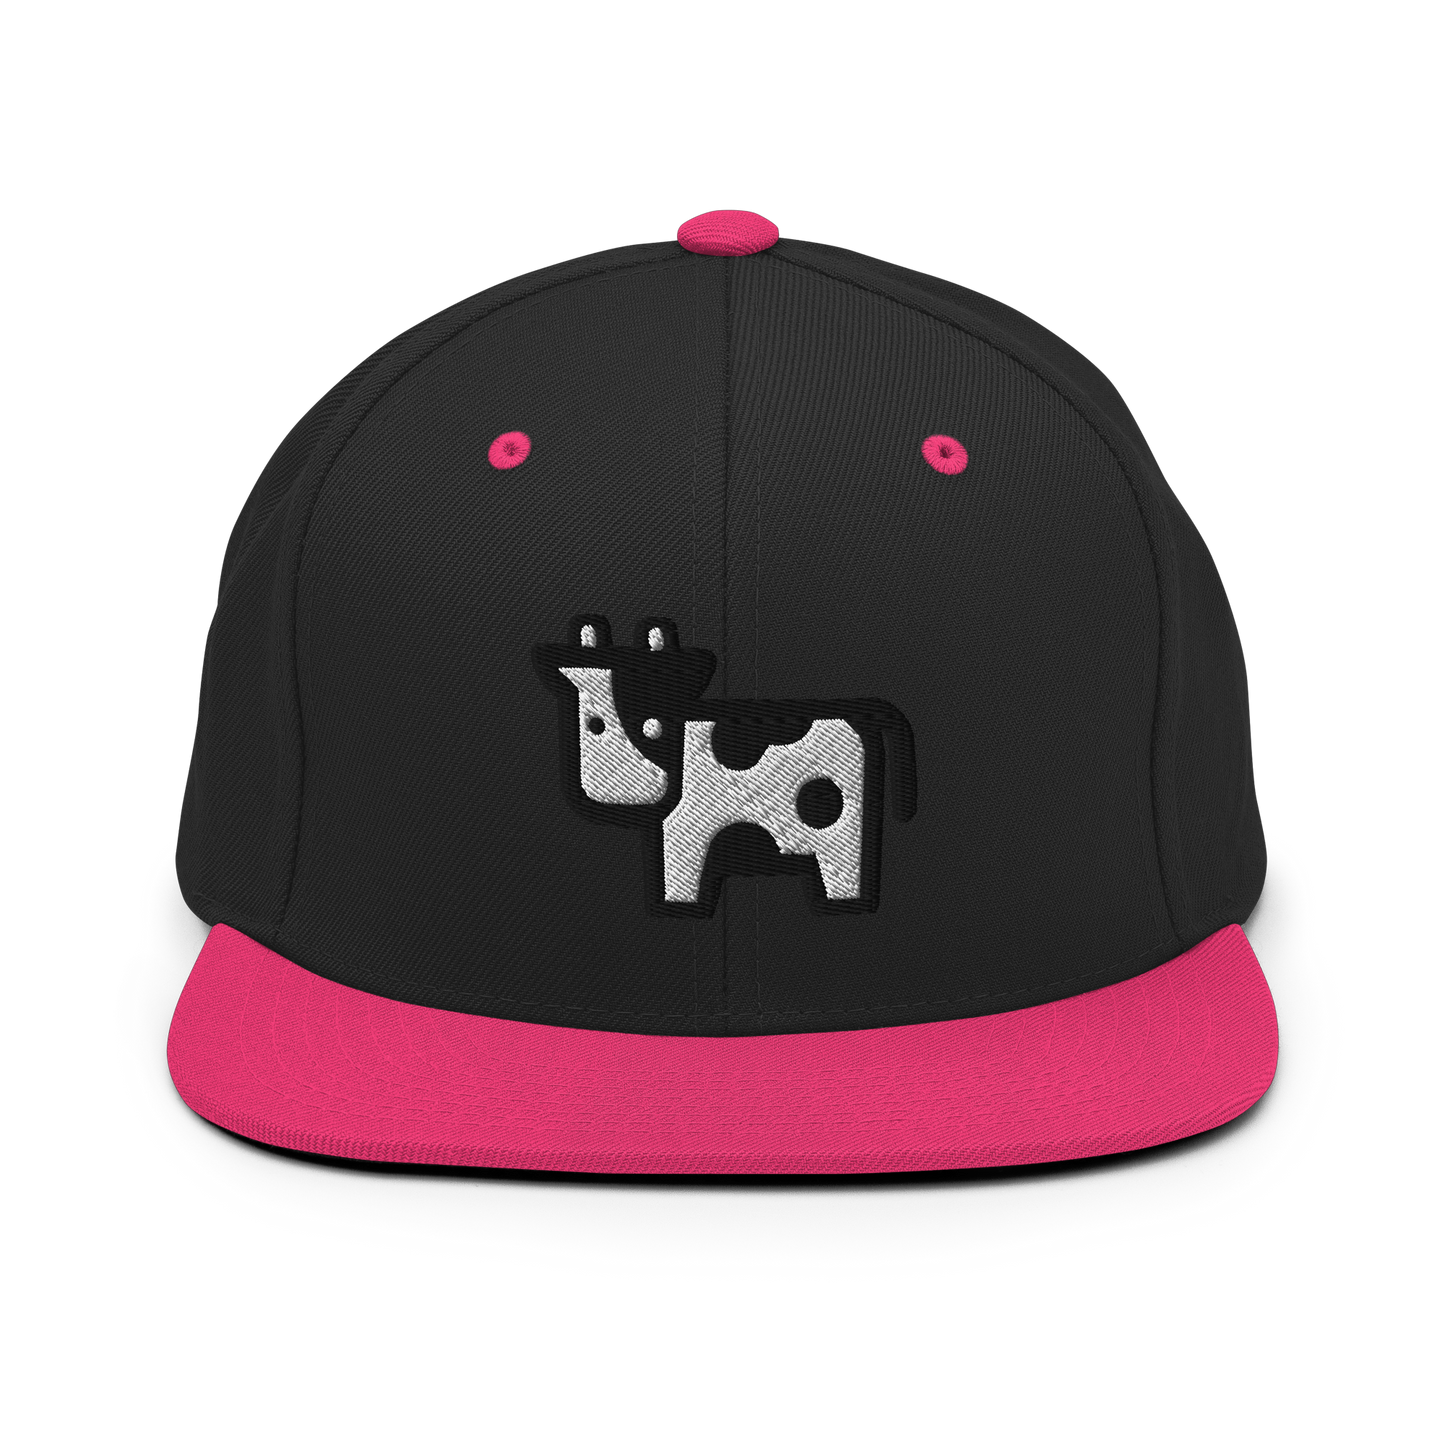 The Beefy Cow Snapback Hat